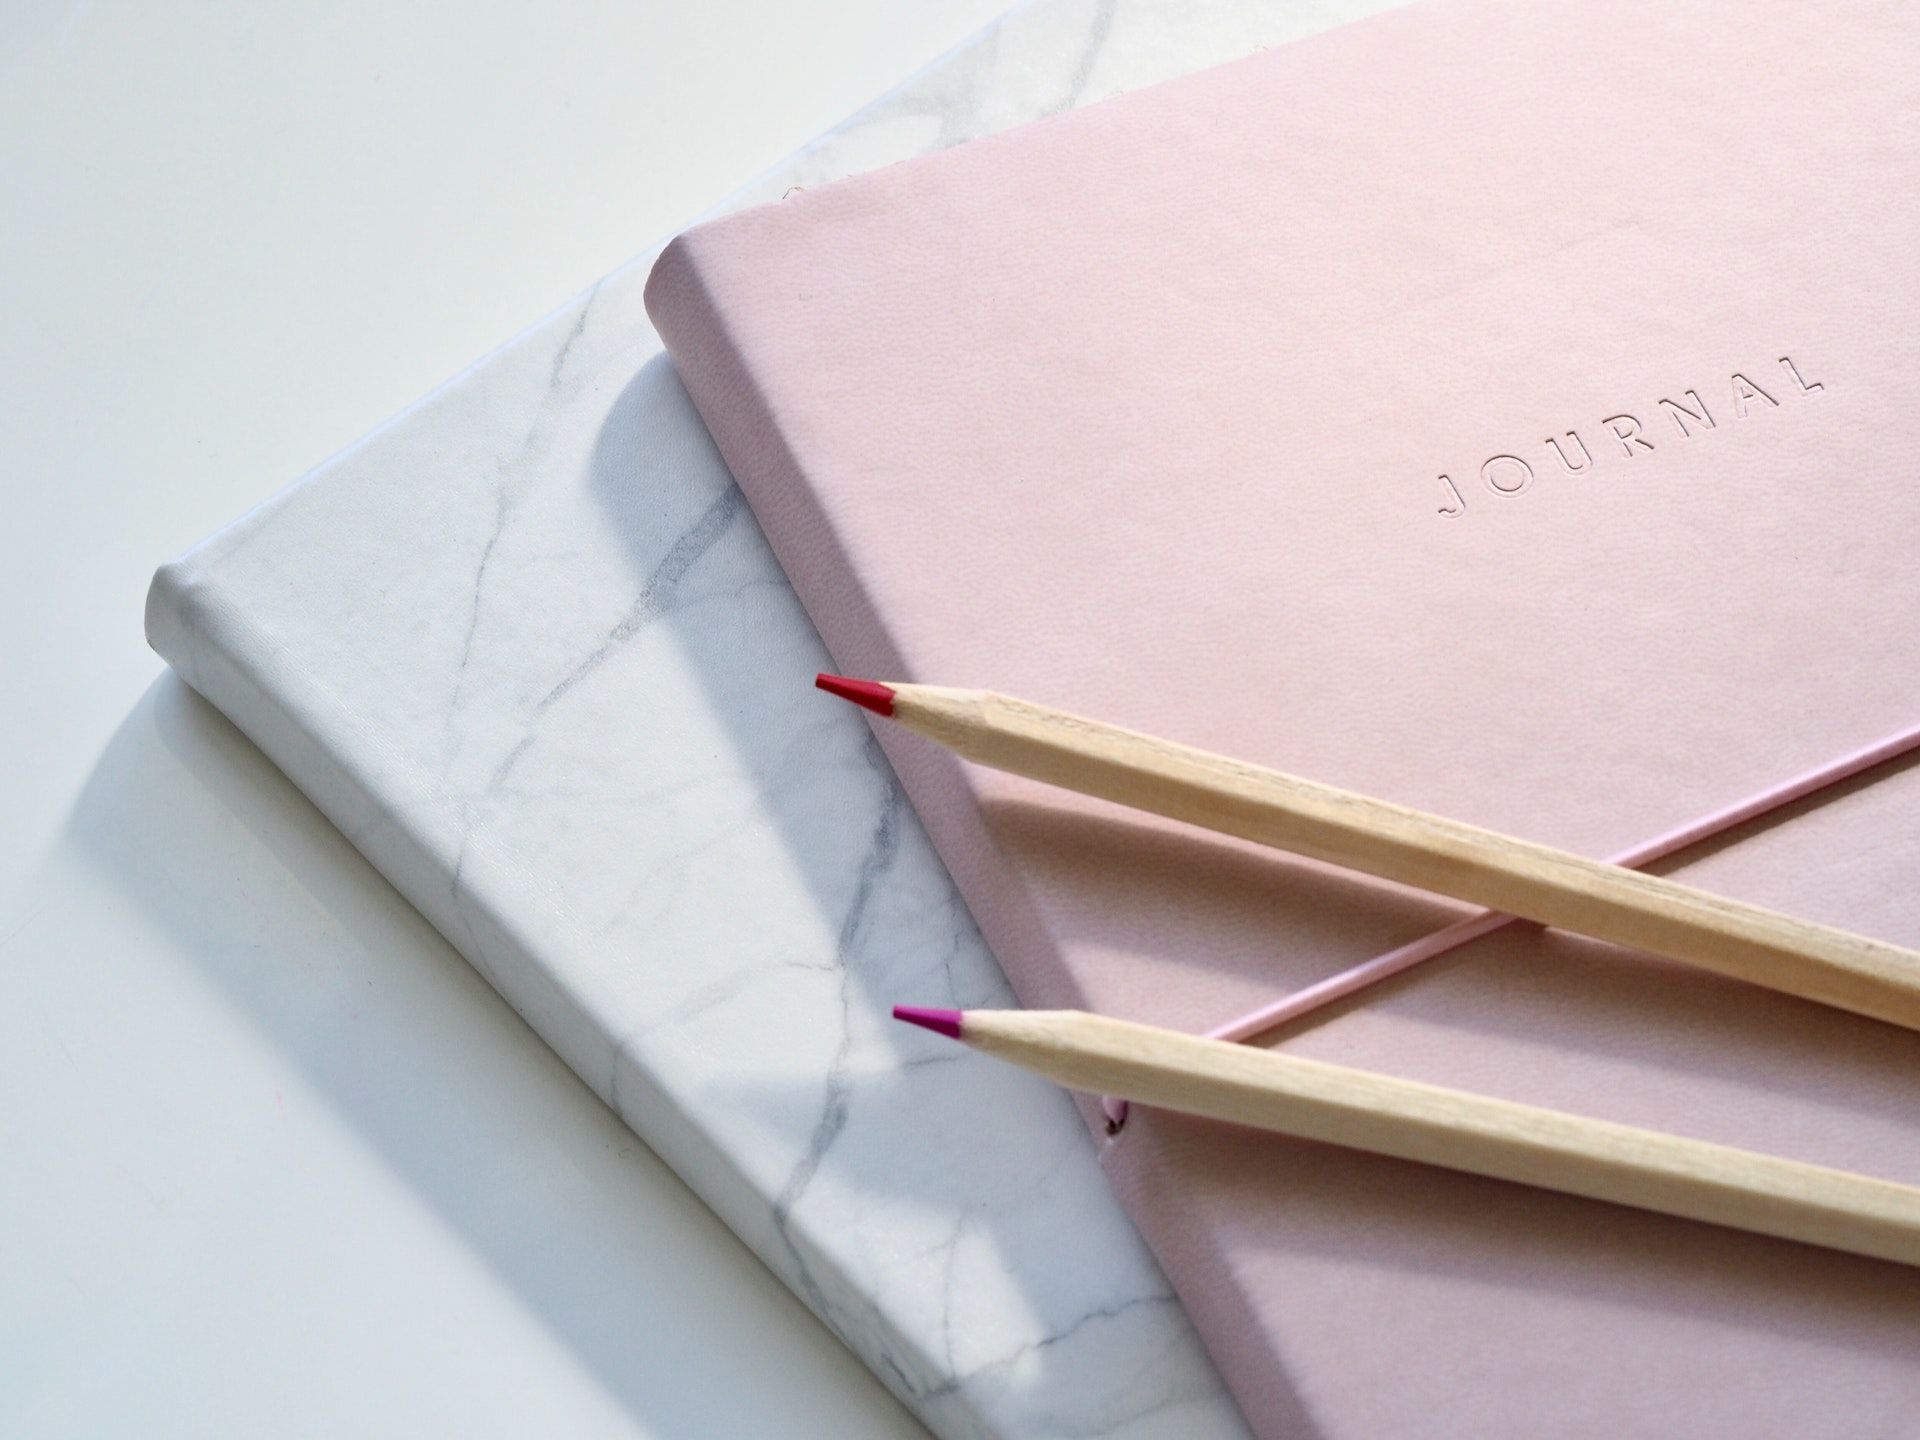 My 7 Simple Tricks To Improve My Mood: Journaling - Write down what's on your mind